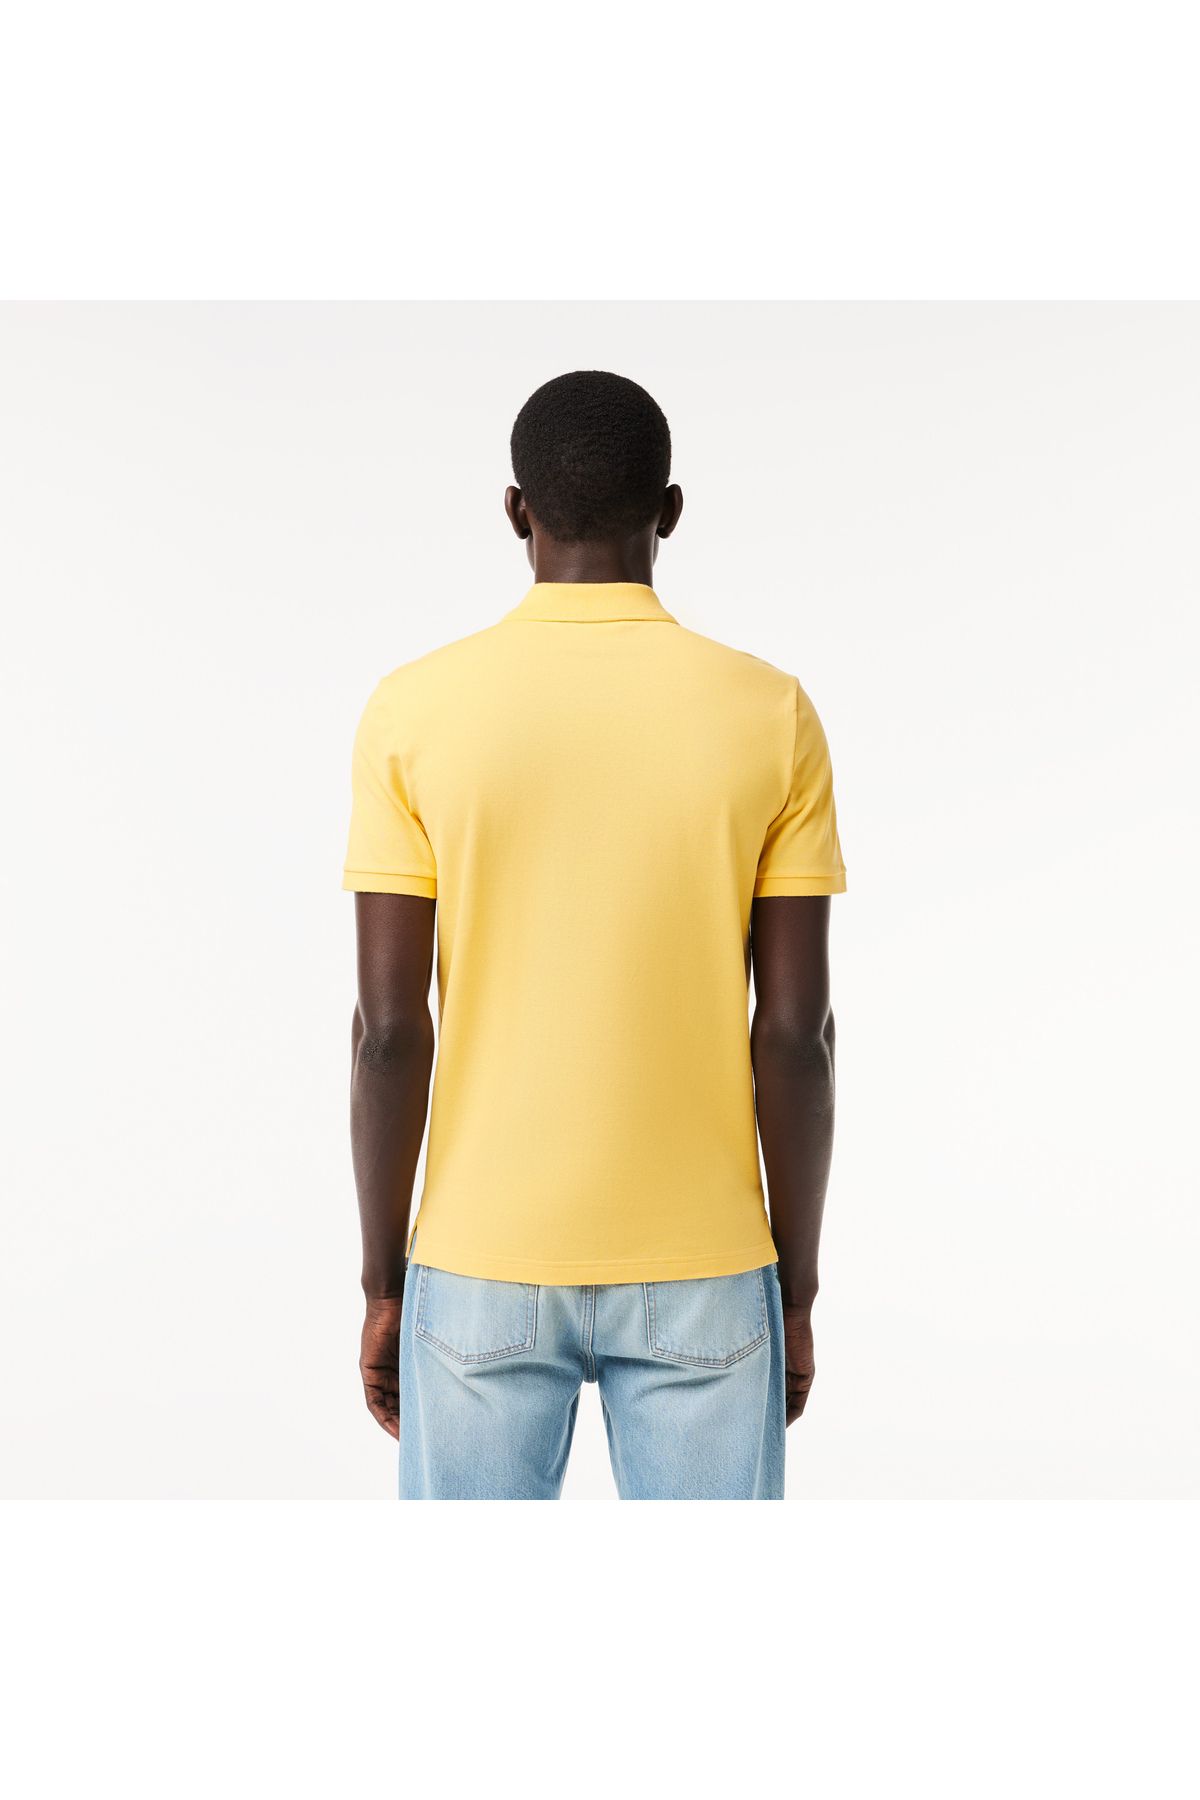 Lacoste L.12.12 Slim Fit Yellow Polo